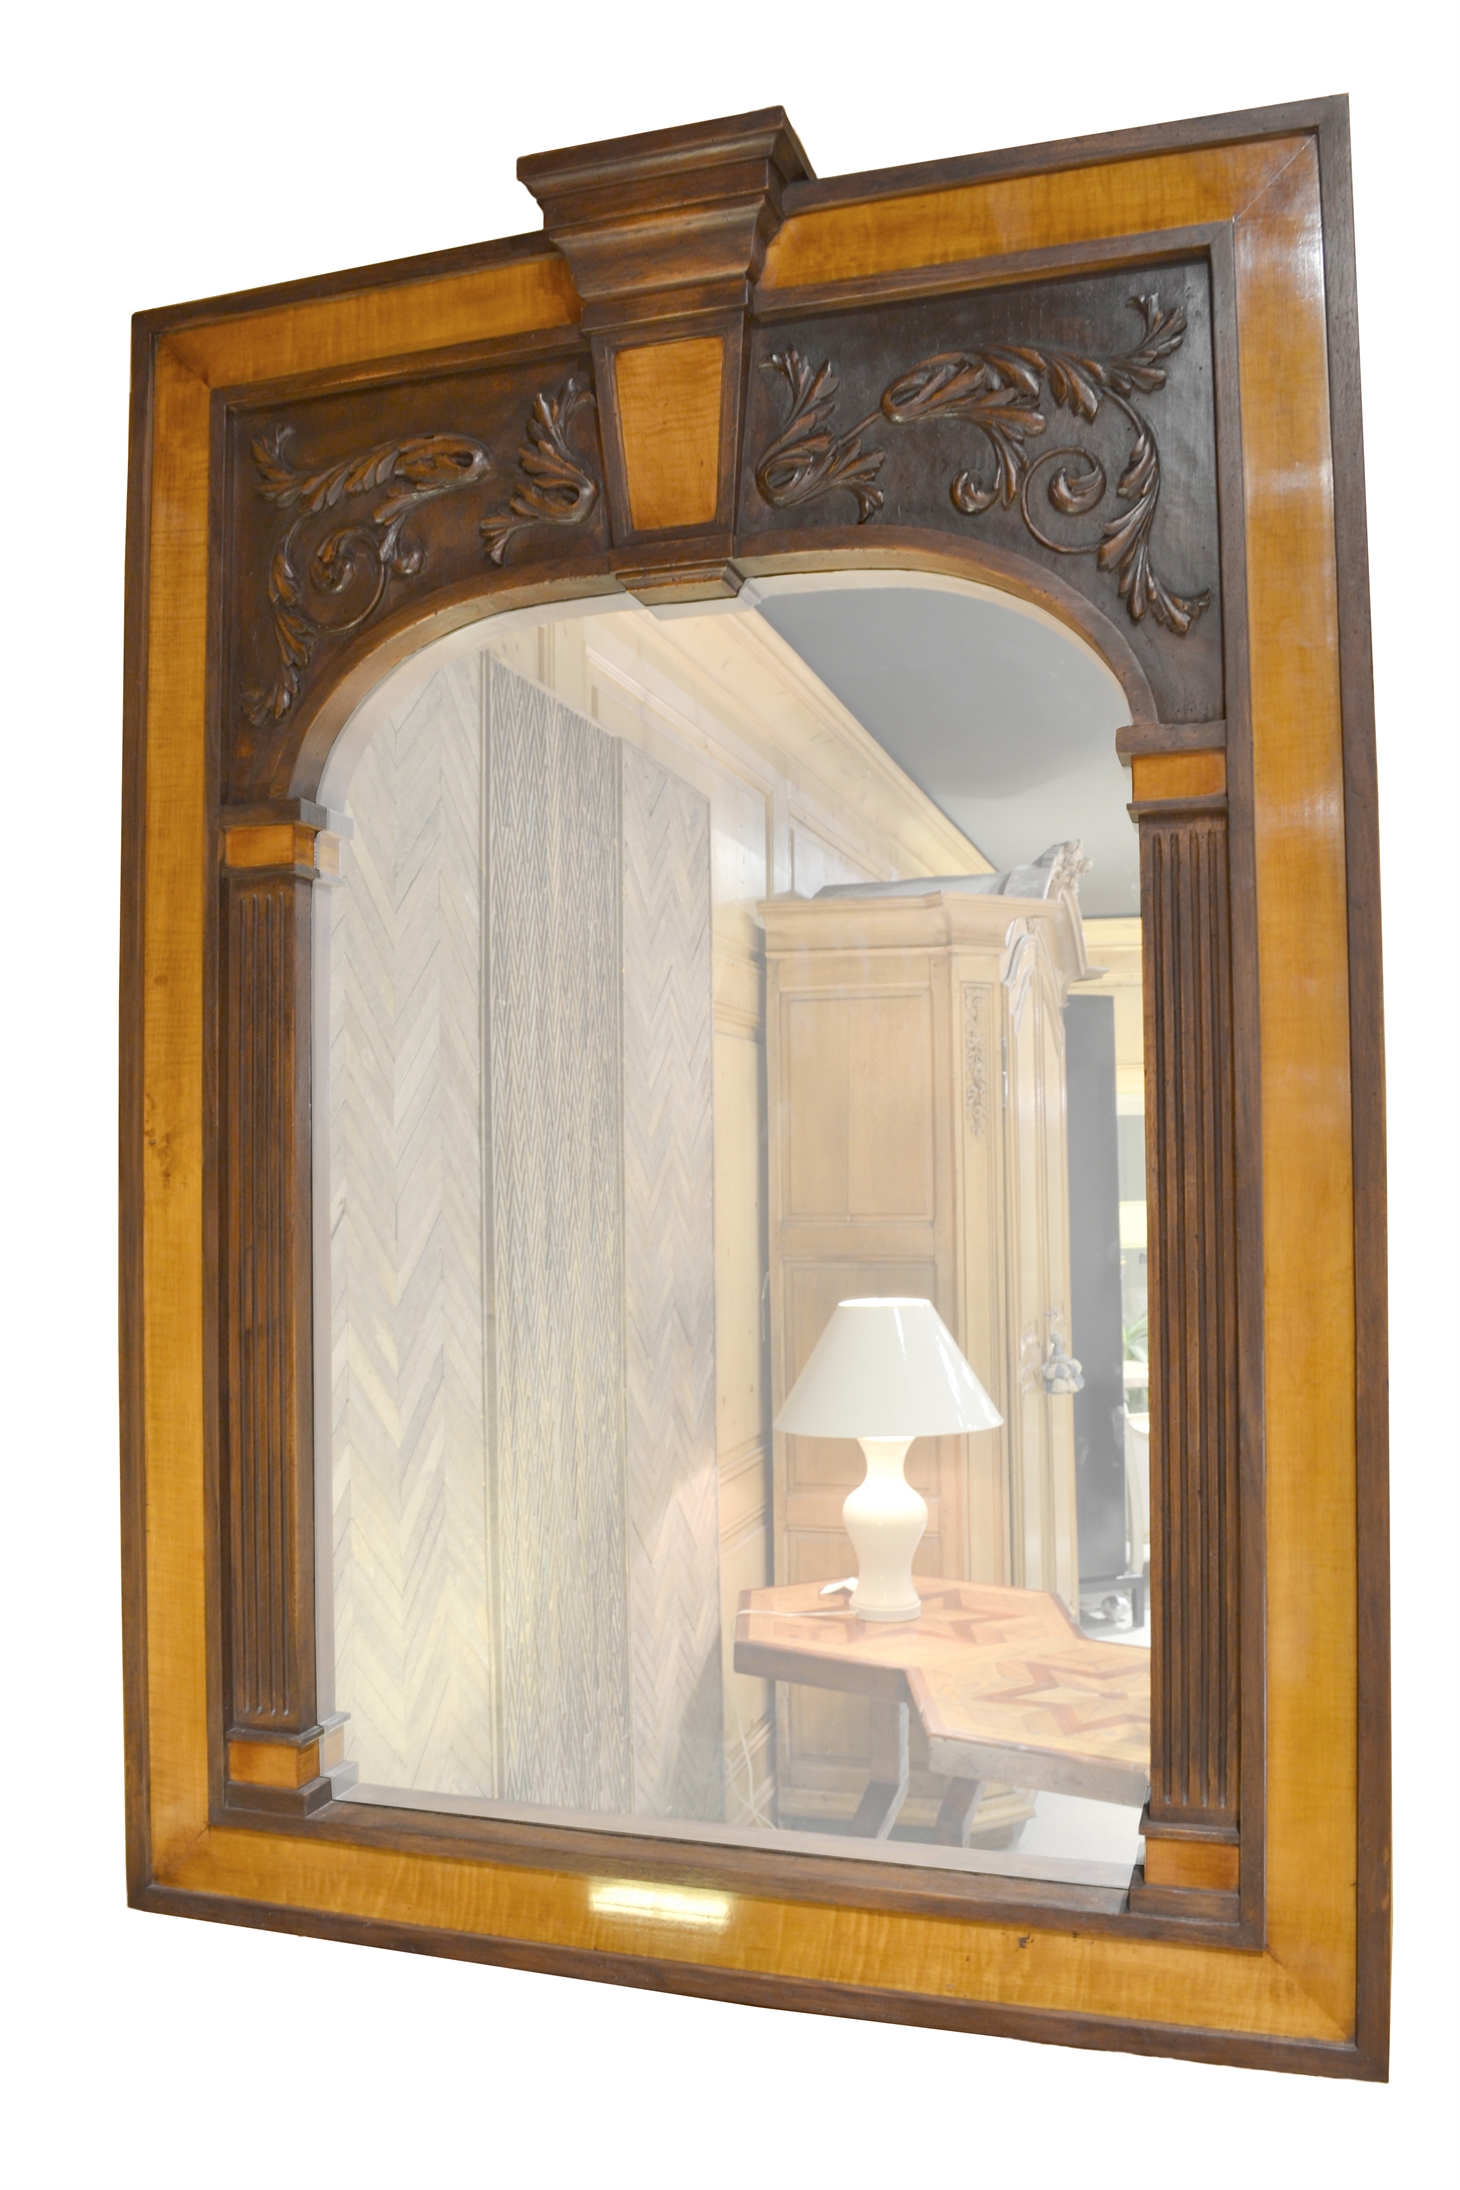 MB/1035a - Walnut and Curly Maple Mirror